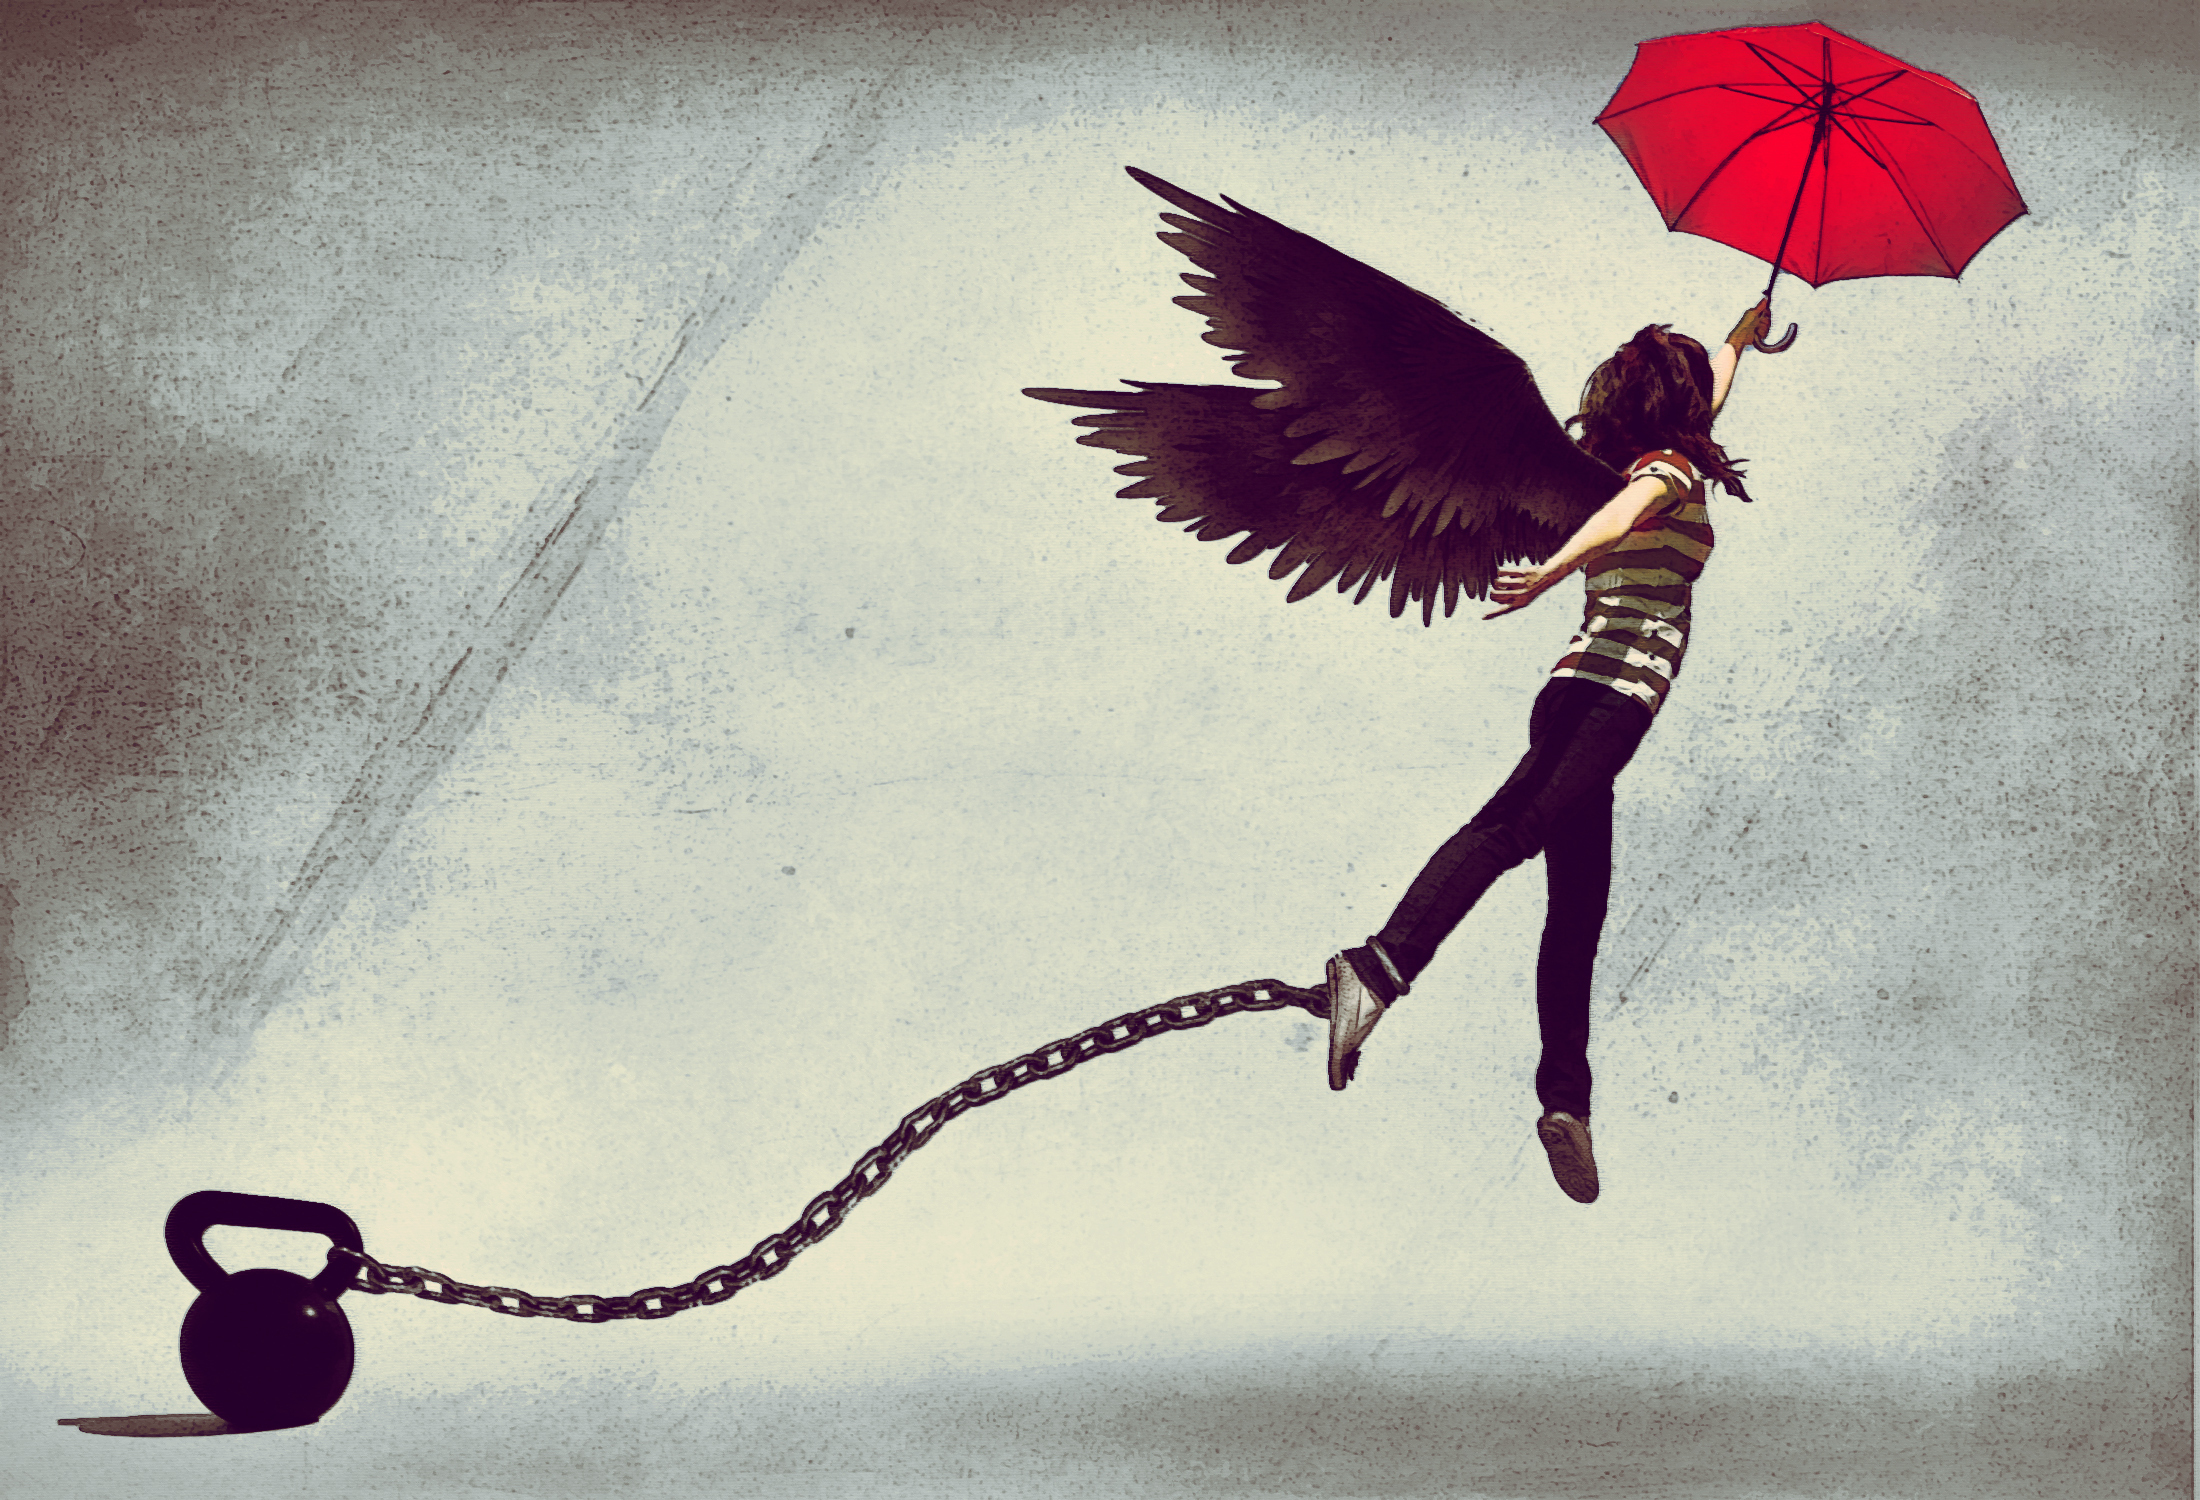 drawing, Girl, Umbrella, Umbrella, Chain, Weight, Wings, Angel, Angels, Gothic, Mood Wallpaper